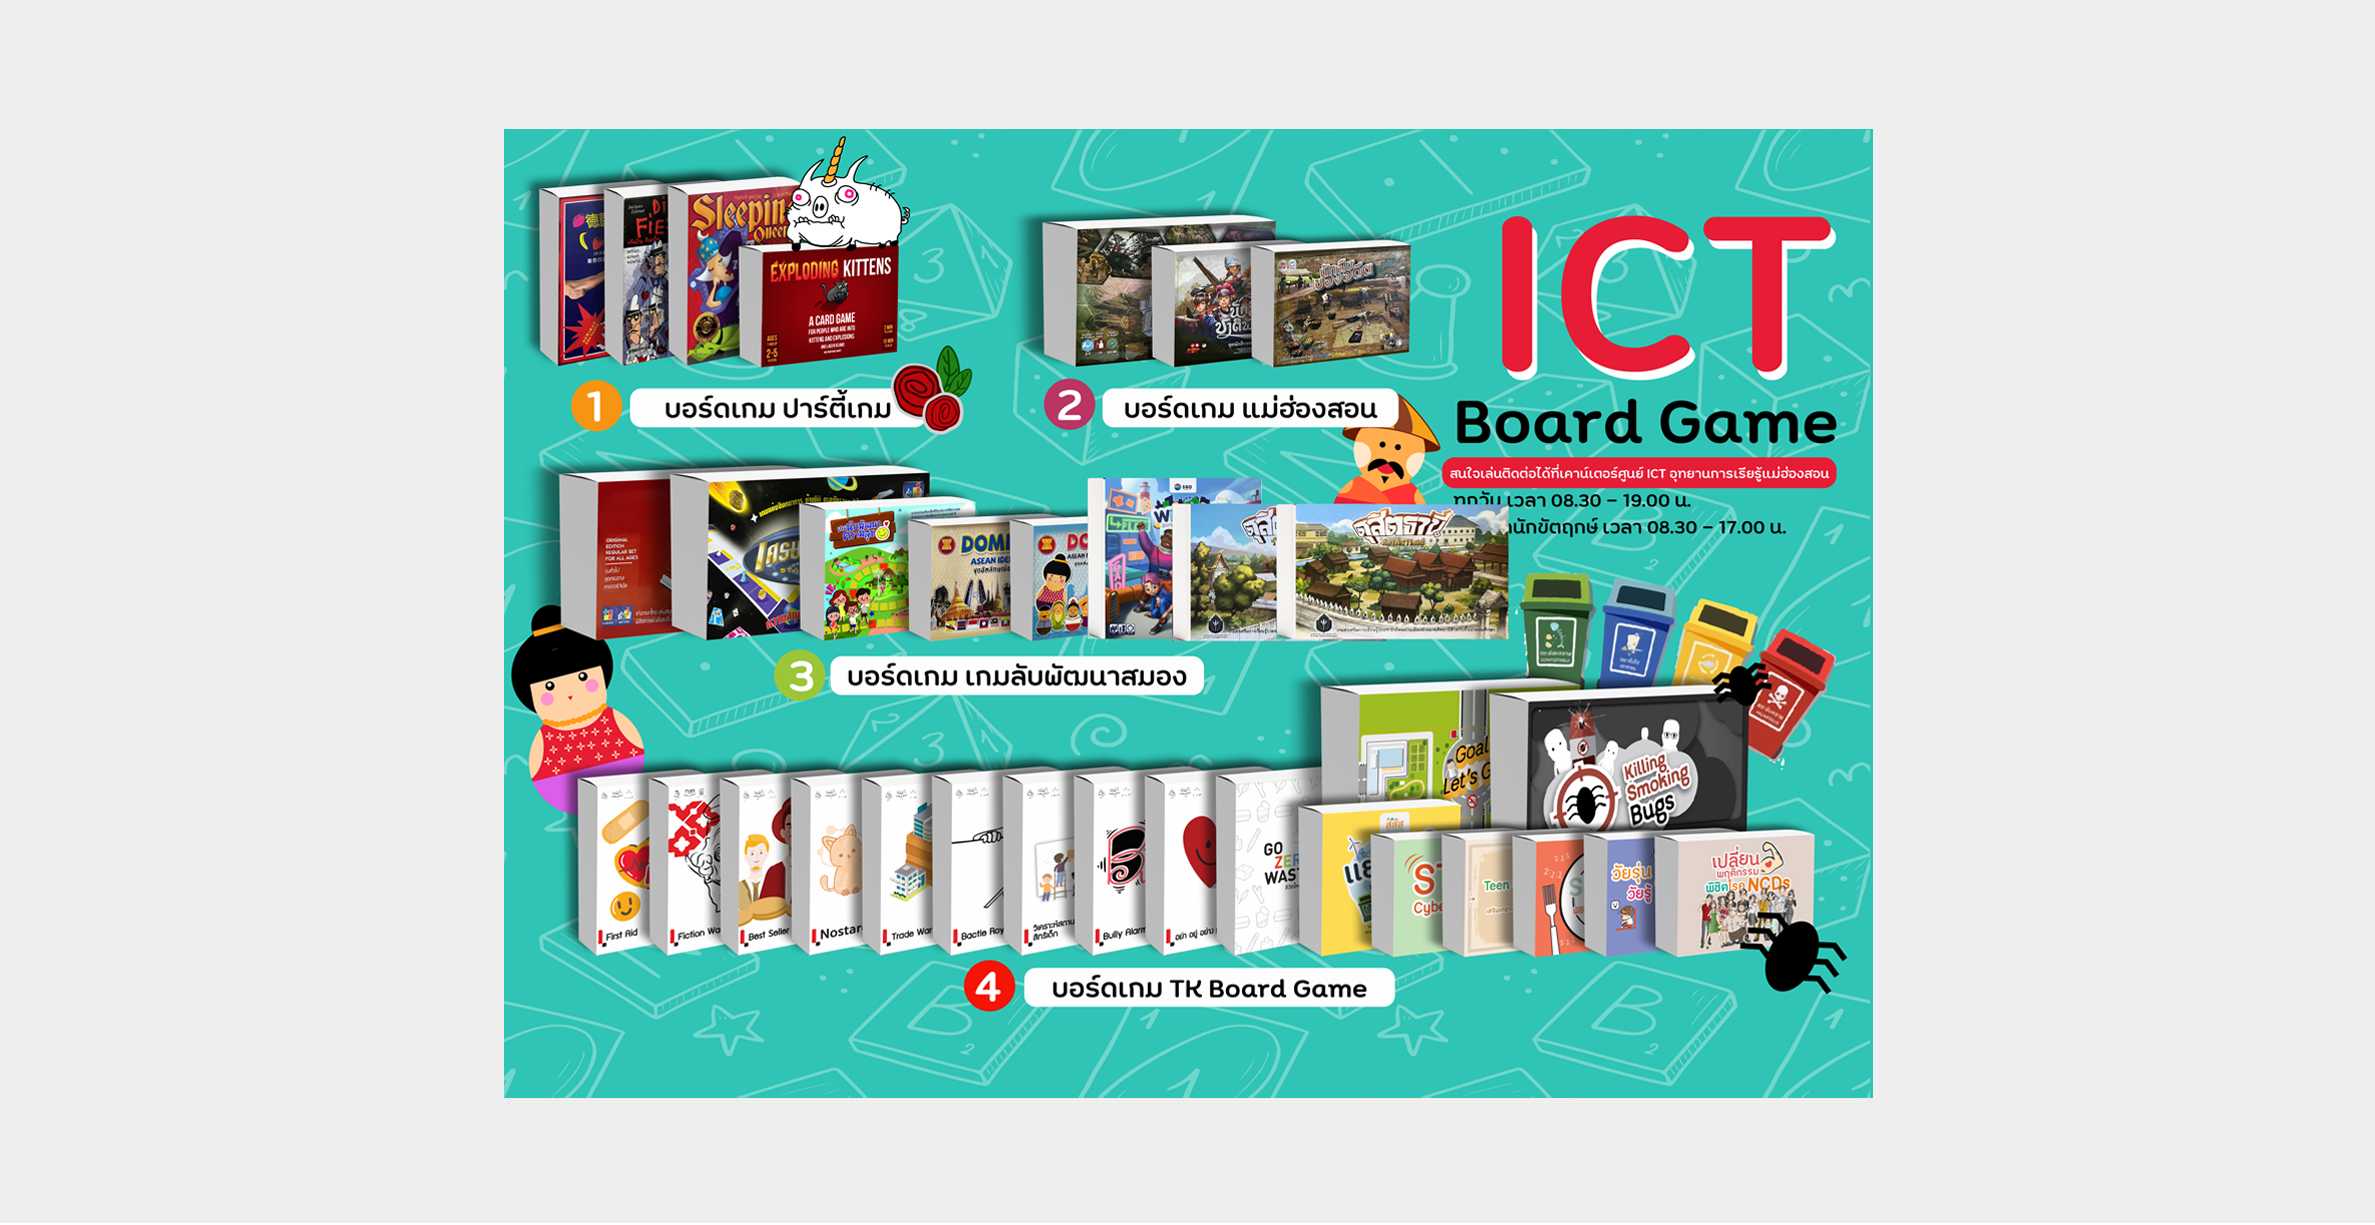 ICT Board Game